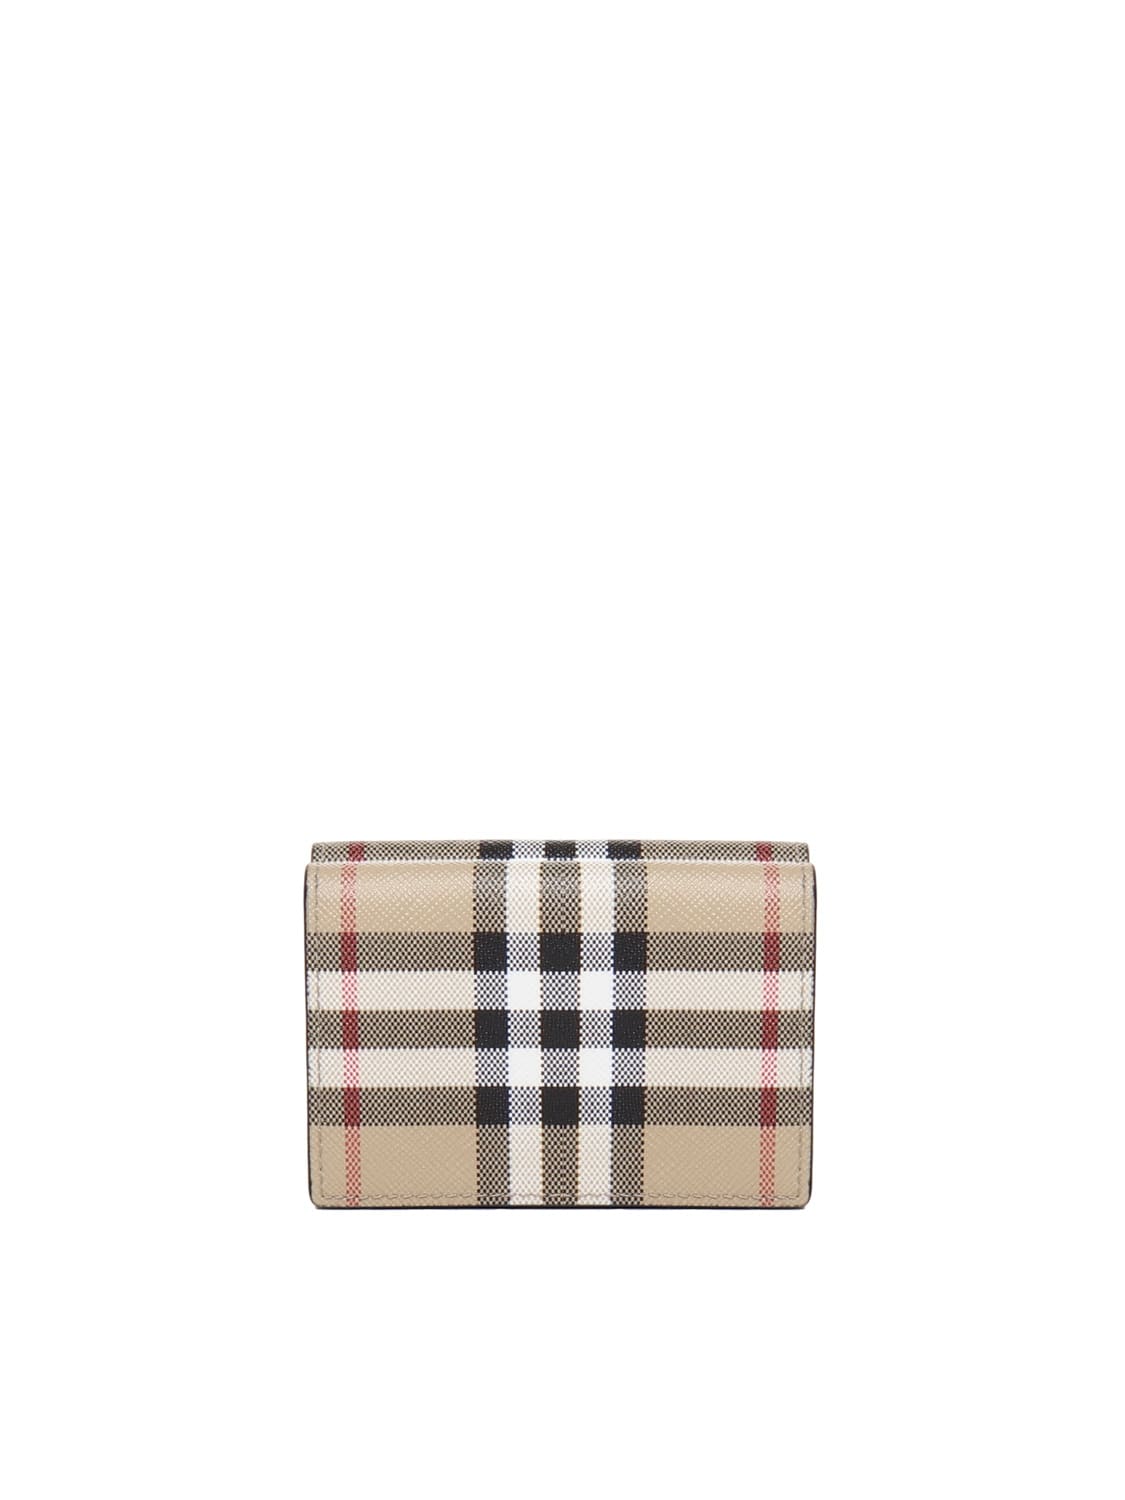 Burberry Leather Wallet With Vintage Check Pattern